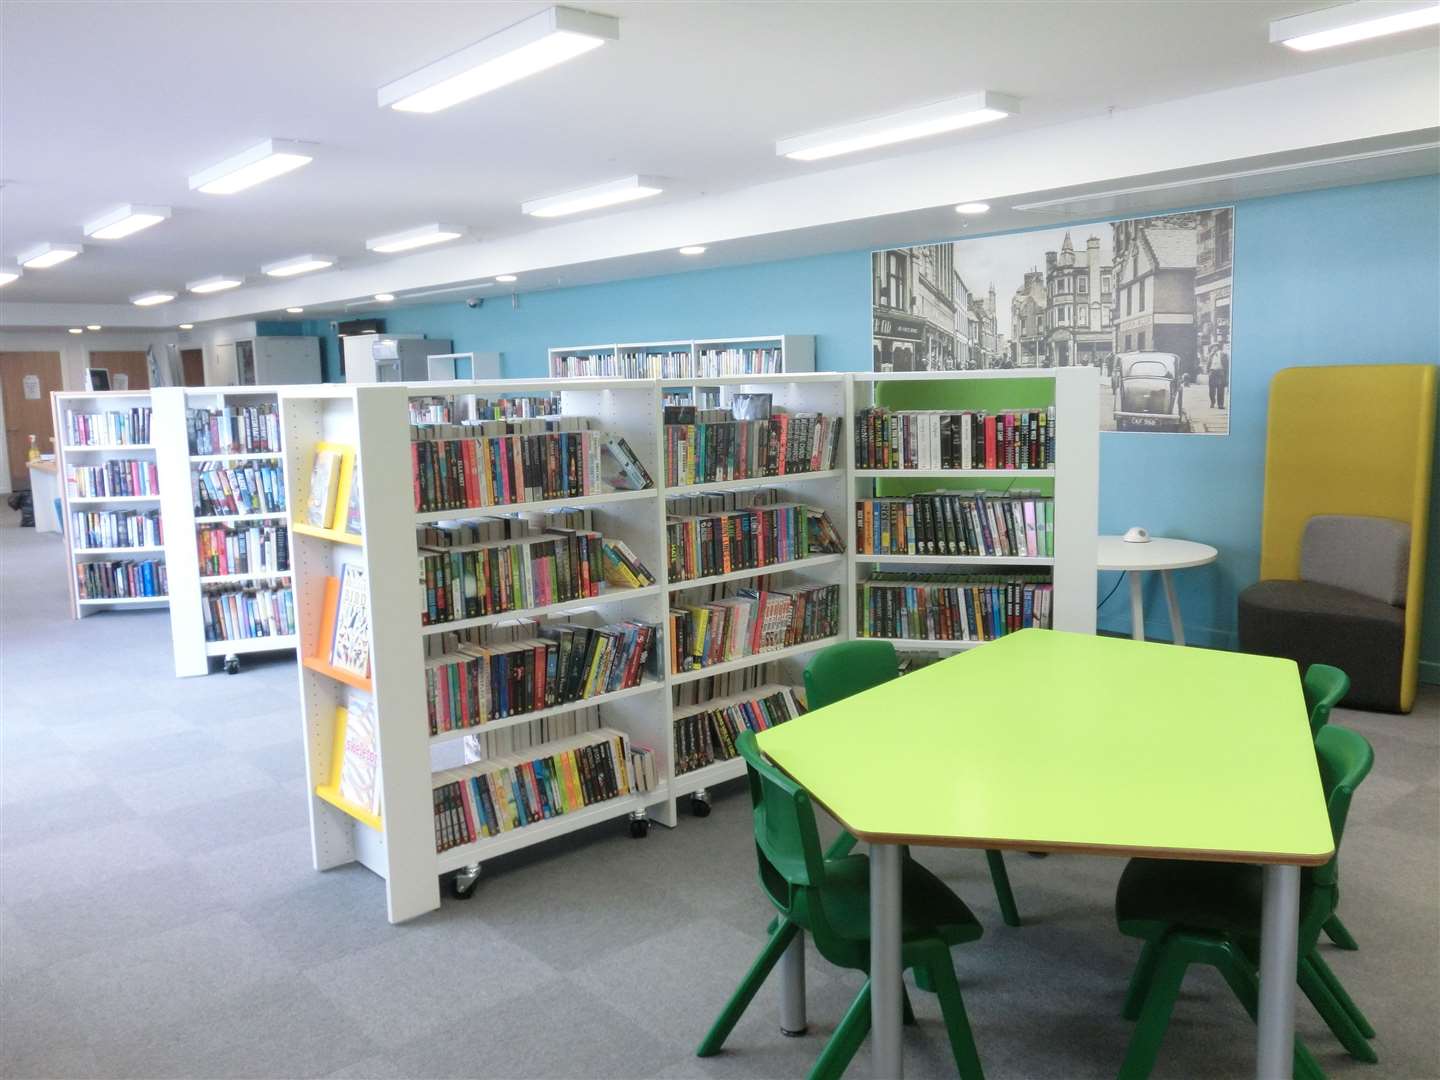 Research suggests public libraries are very much valued by local communities.